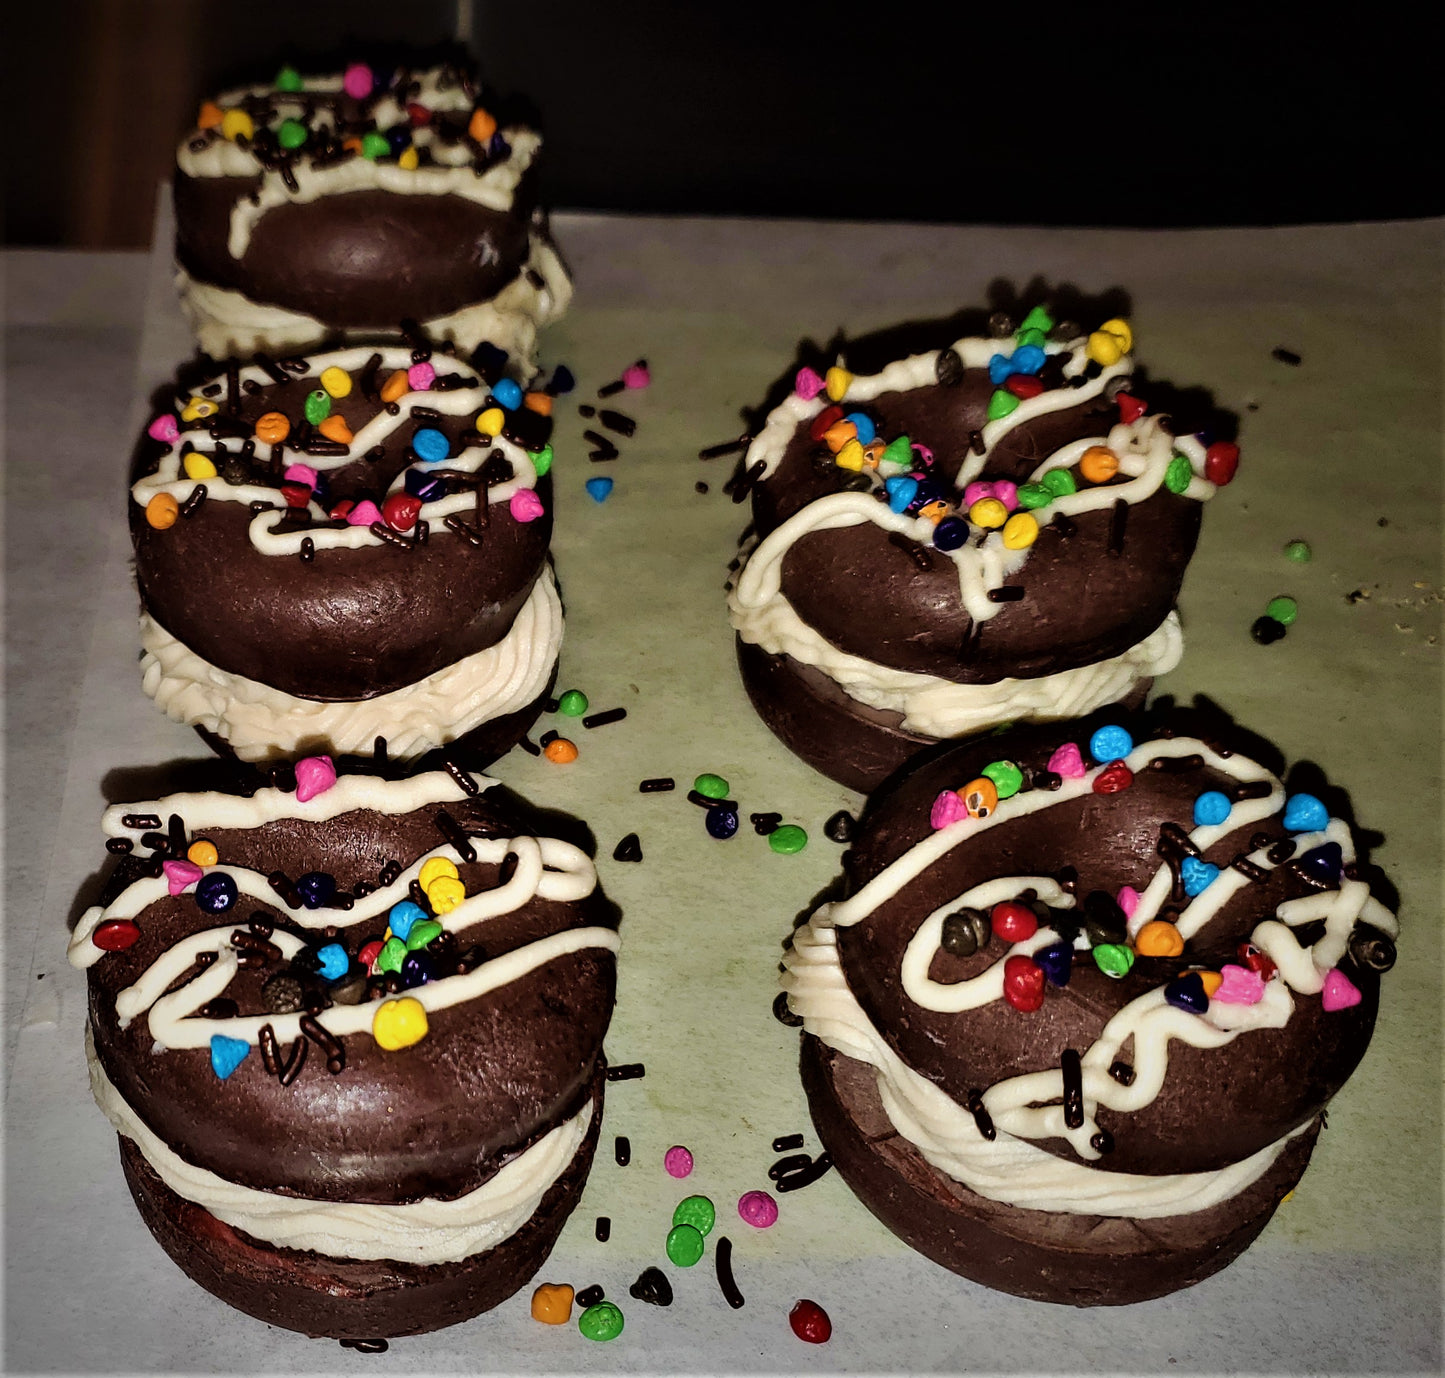 Chocolate Donuts Soap Stuffed with Whipped Cream/Bath, local,bar soap, gentle soap,artisan soap homemade soap, fun soap, handcrafted soap, gift, wedding, candy,sweet, gourgeous,beauty,luxurious